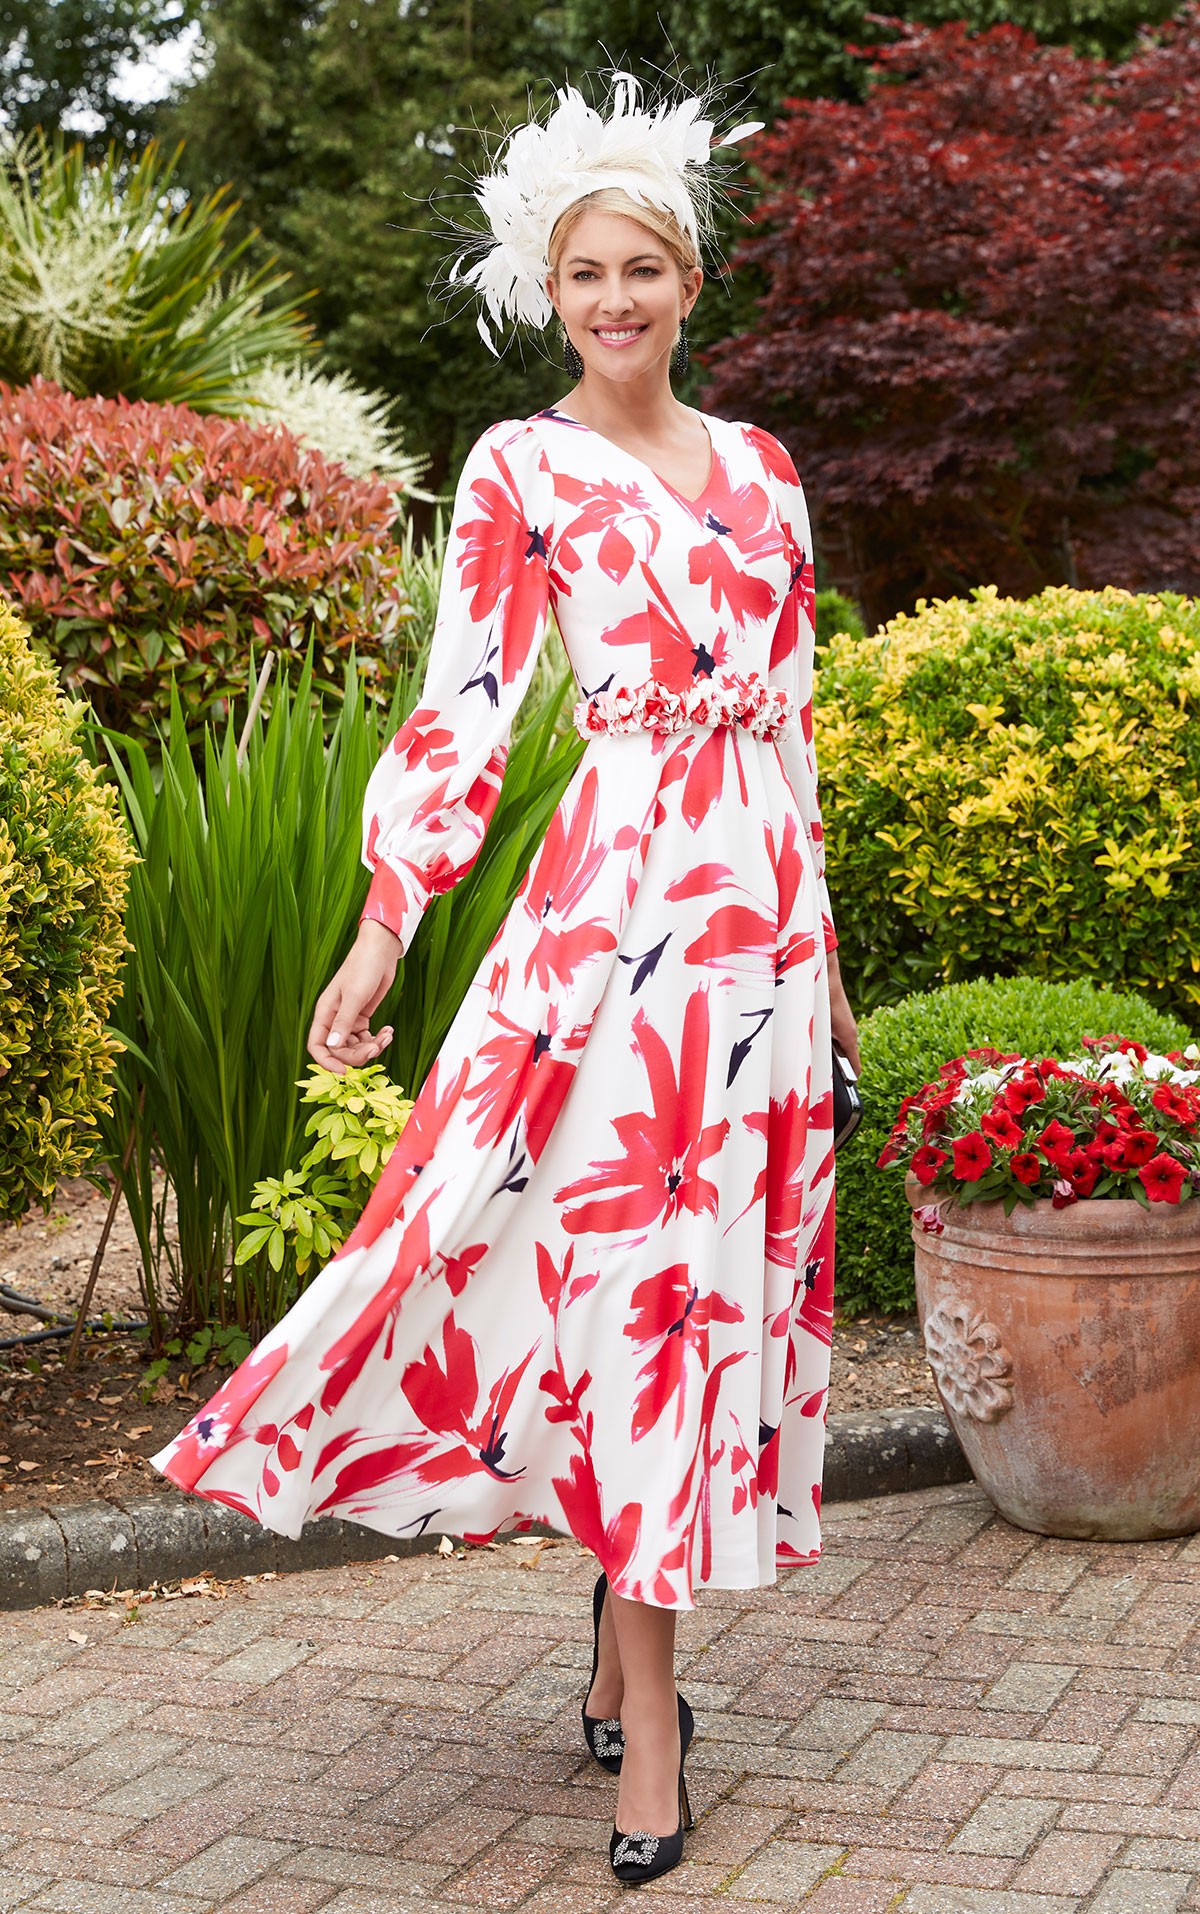 Veni Infantino - 29679 Size 8, 12, 16 - Veni Infantino Invitations Collection 29679 - Long Floral print dress with sleeves - Spring Summer Mother of the Bride dresses Now on Sale at Occasions at Blessings Loyal Parade, Mill Rise, Westdene, Brighton. BN1 5GG T: 01273 505766 E: info@blessingsbridal.co.uk